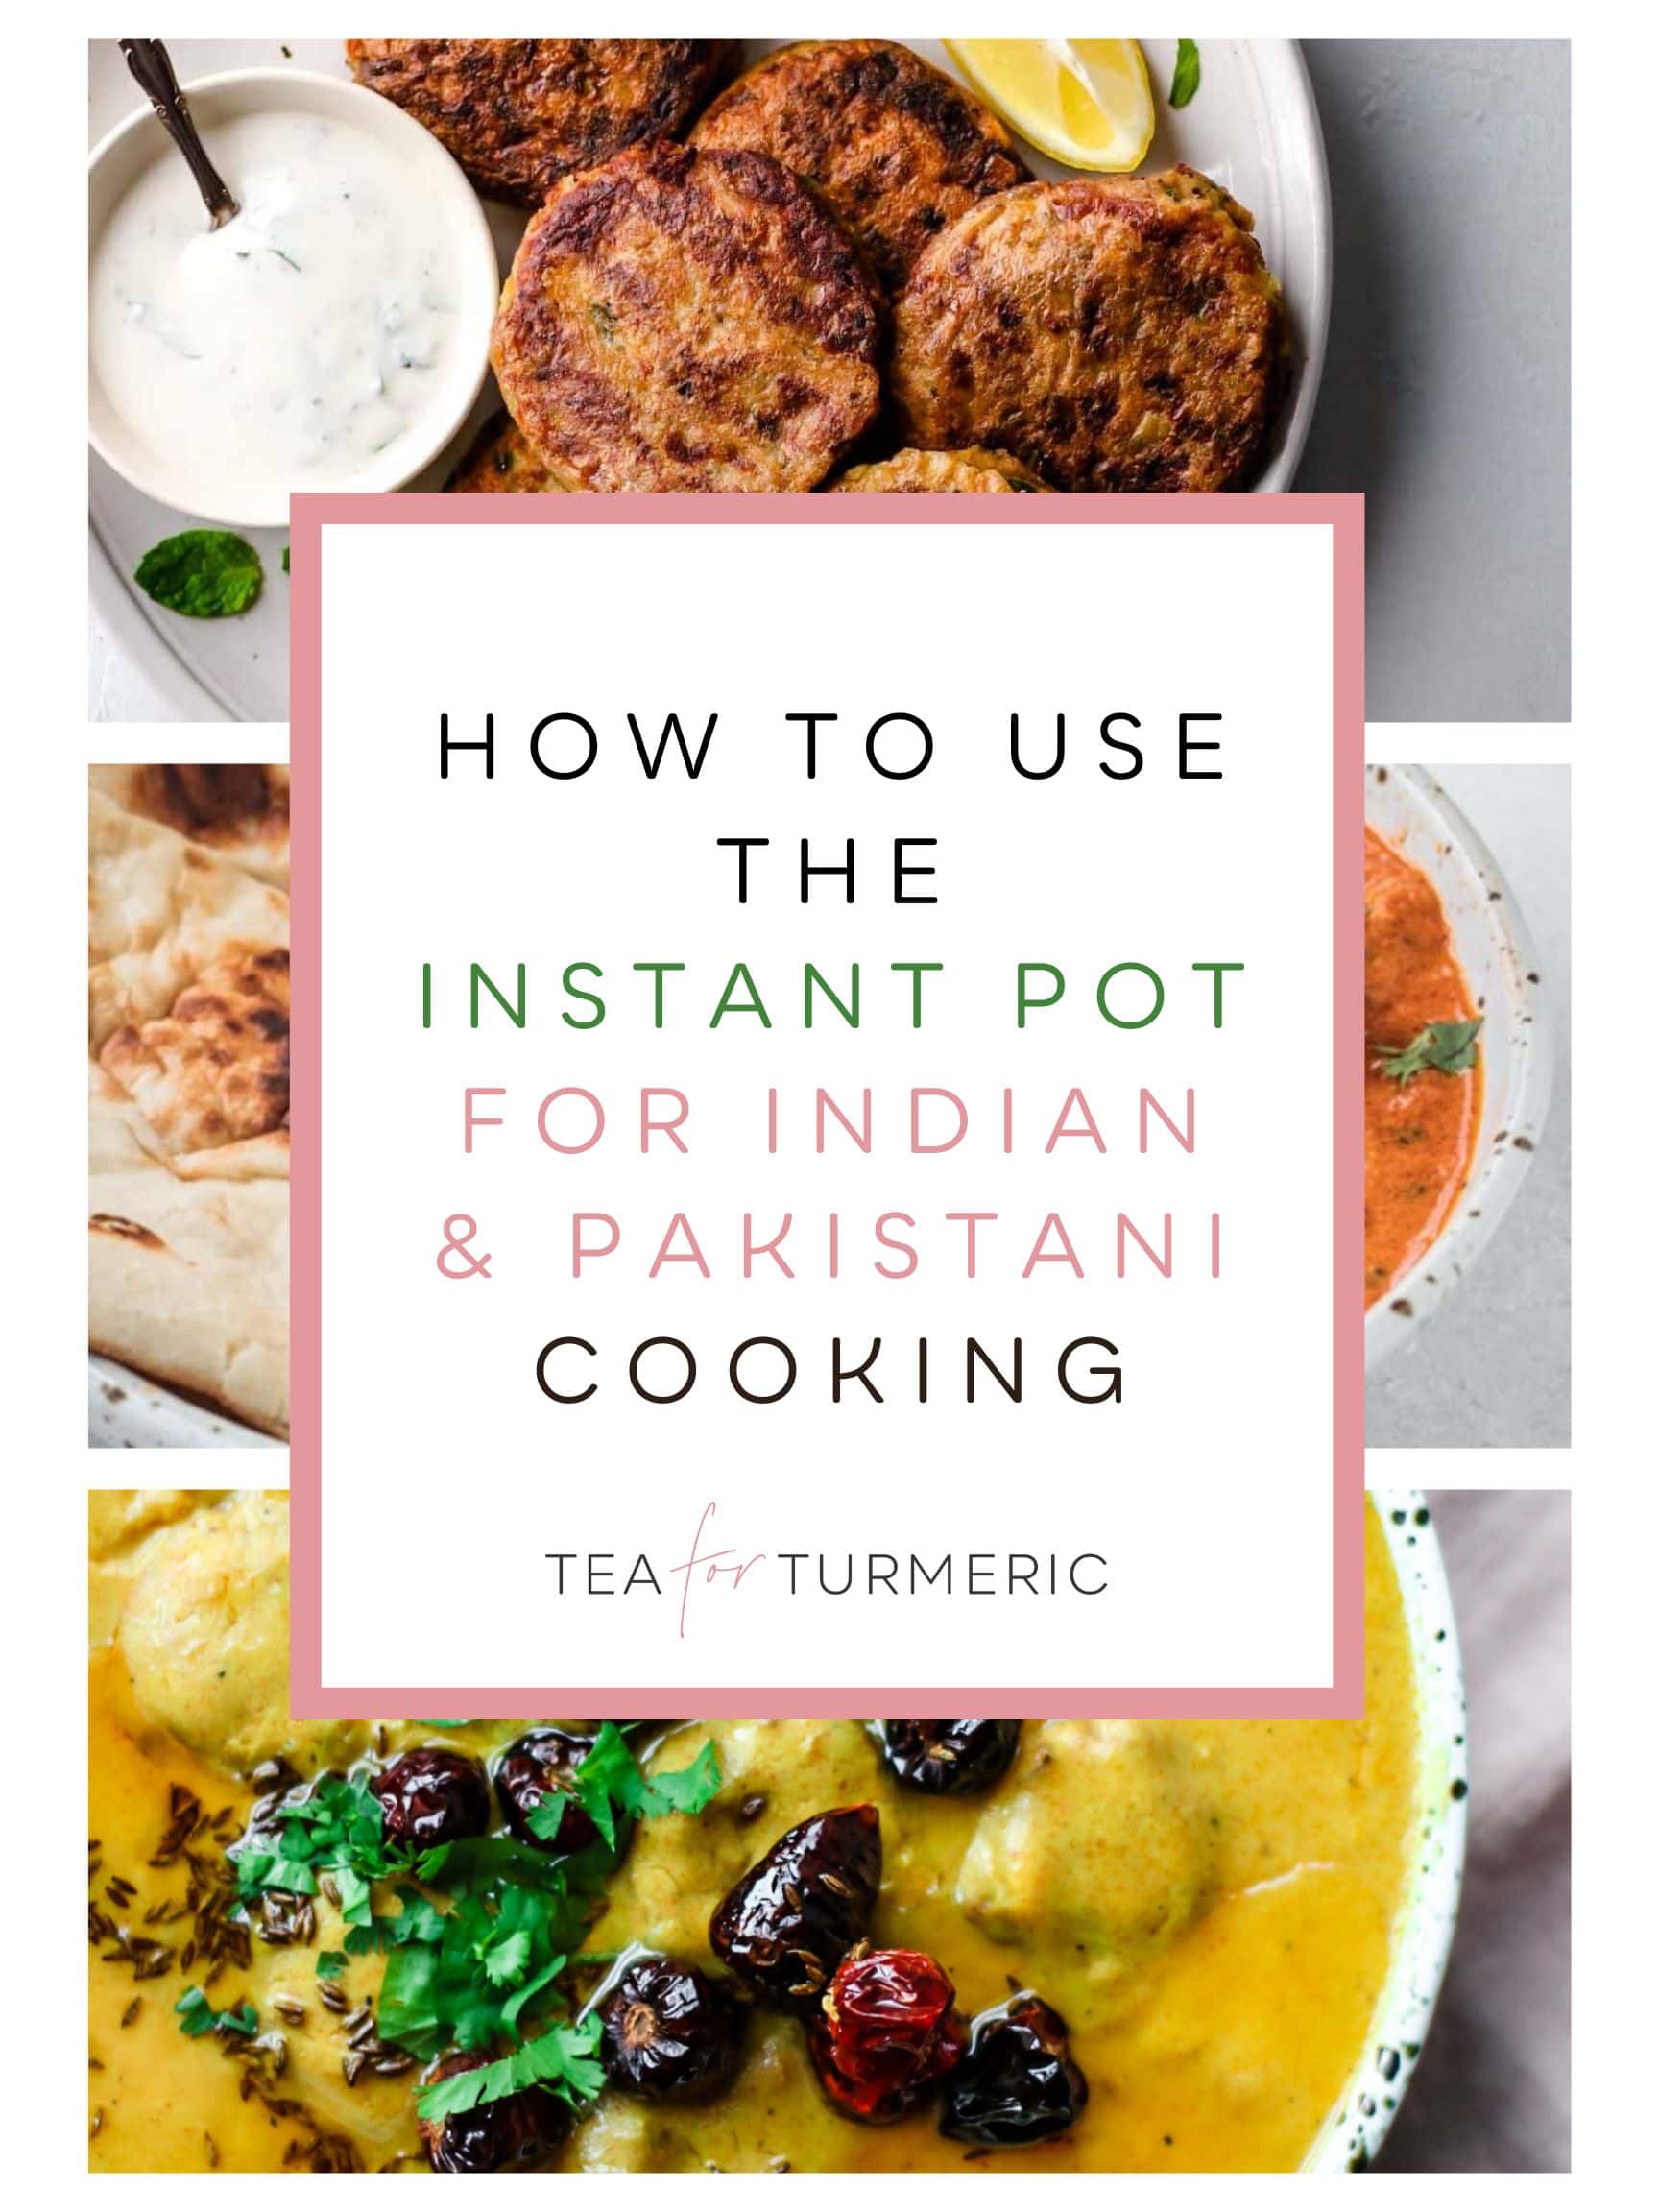 Tips To Save Traditional Indian Cookware